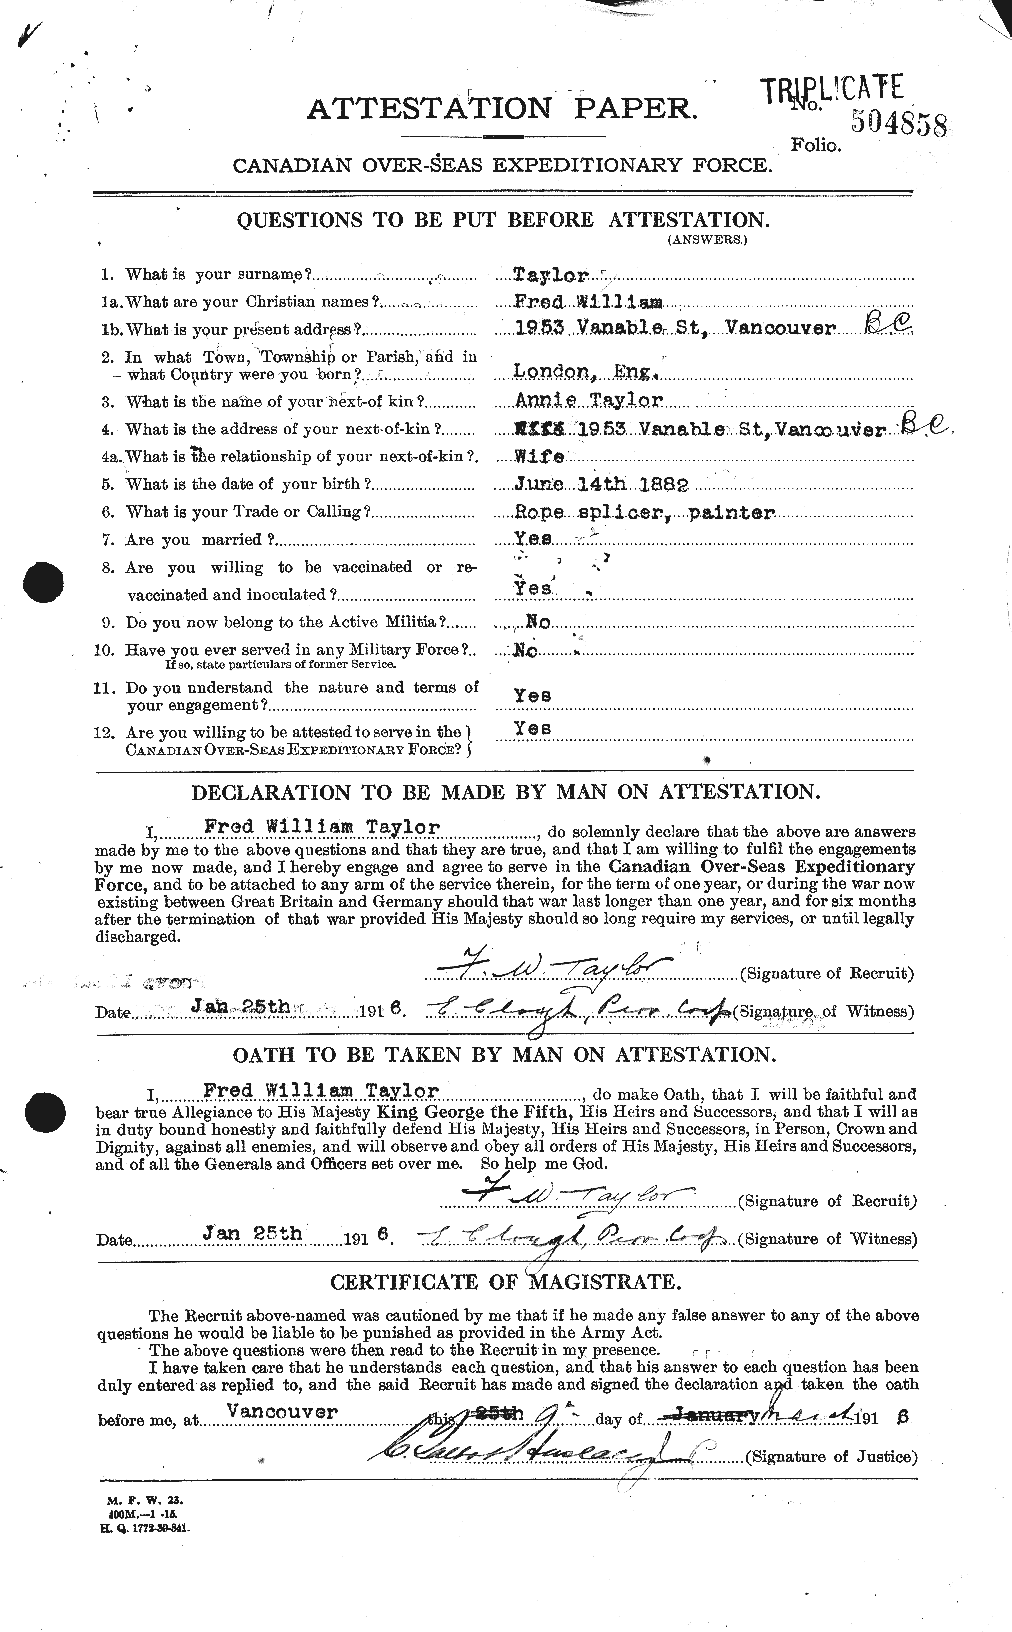 Personnel Records of the First World War - CEF 625759a